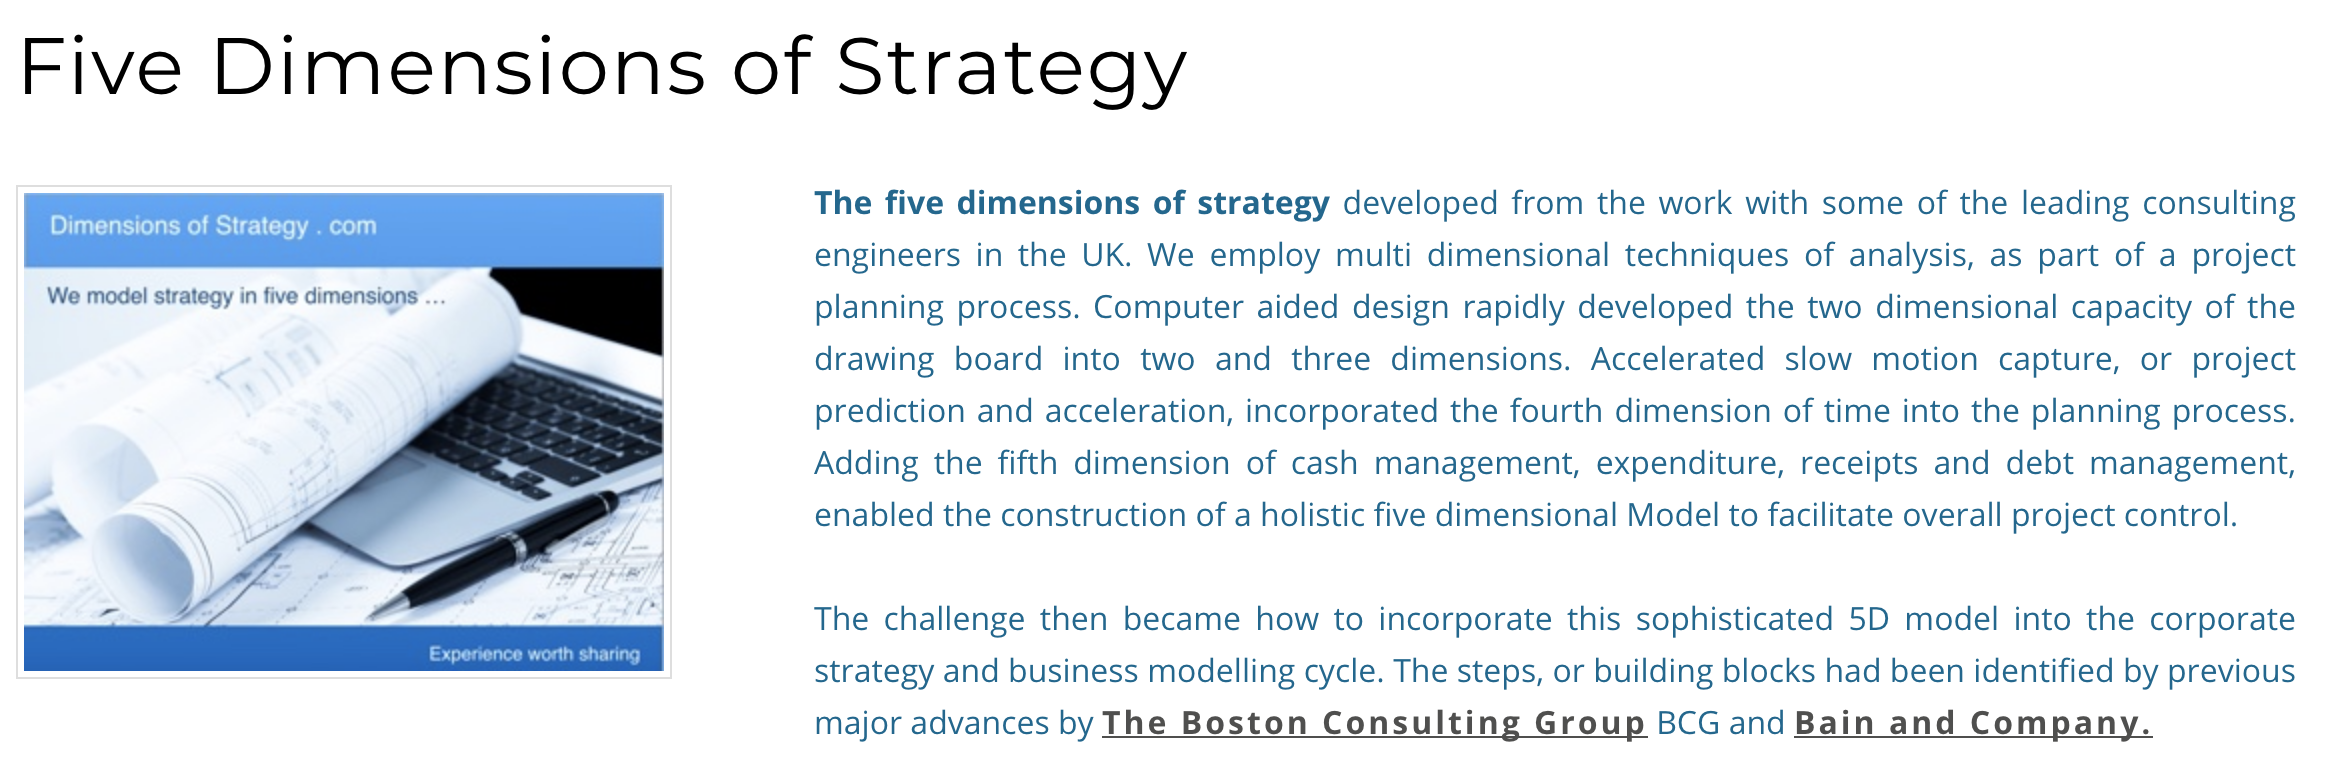 The Five Dimensions of Strategy